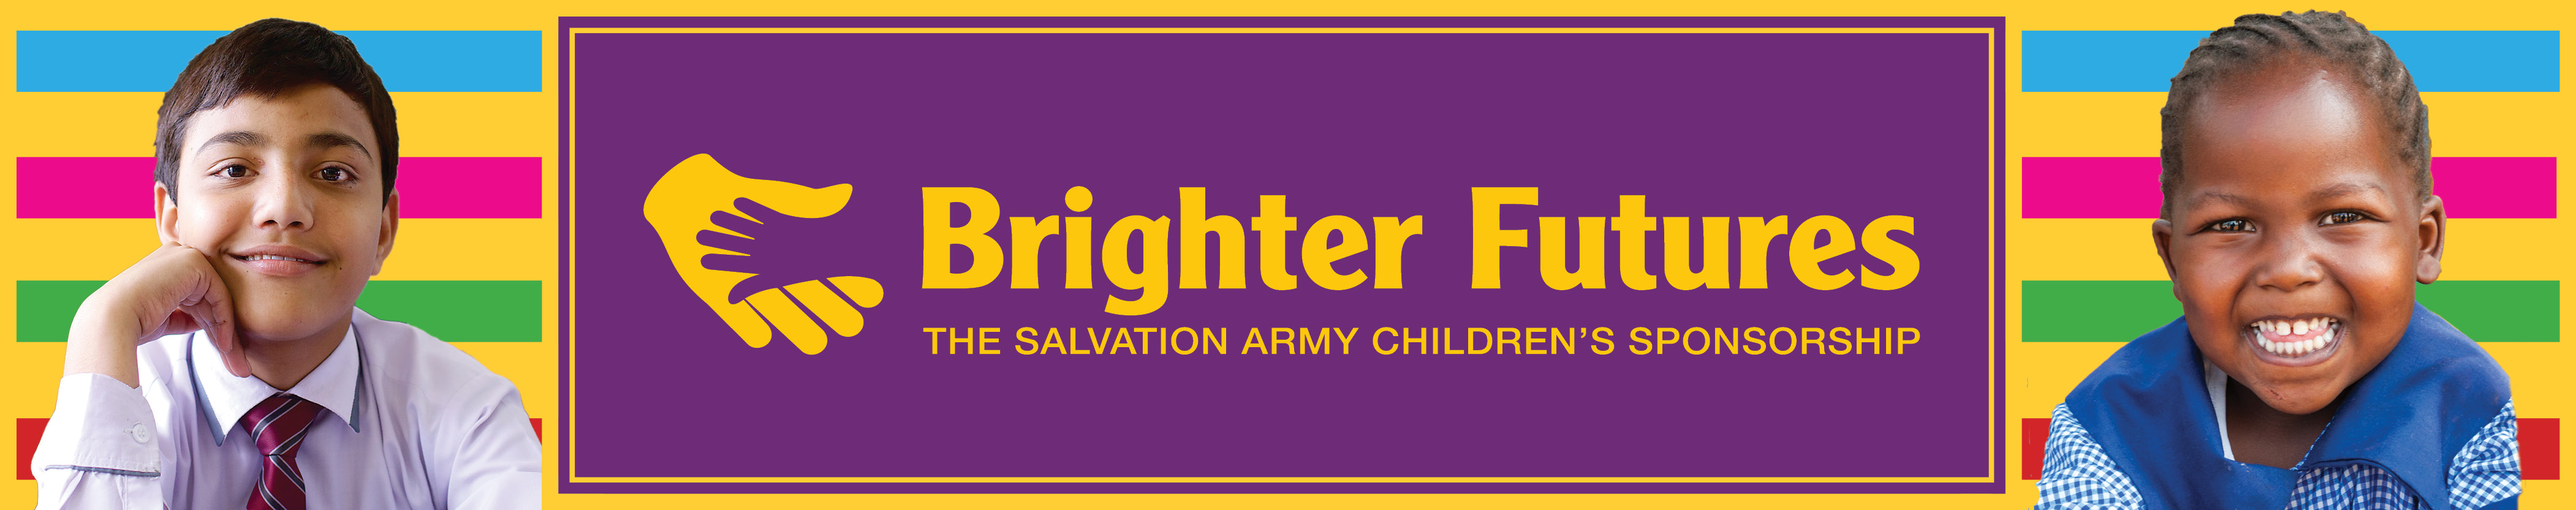 brighter futures: the salvation army's children sponsorship. Two children are on end of the banner smiling at the camera.